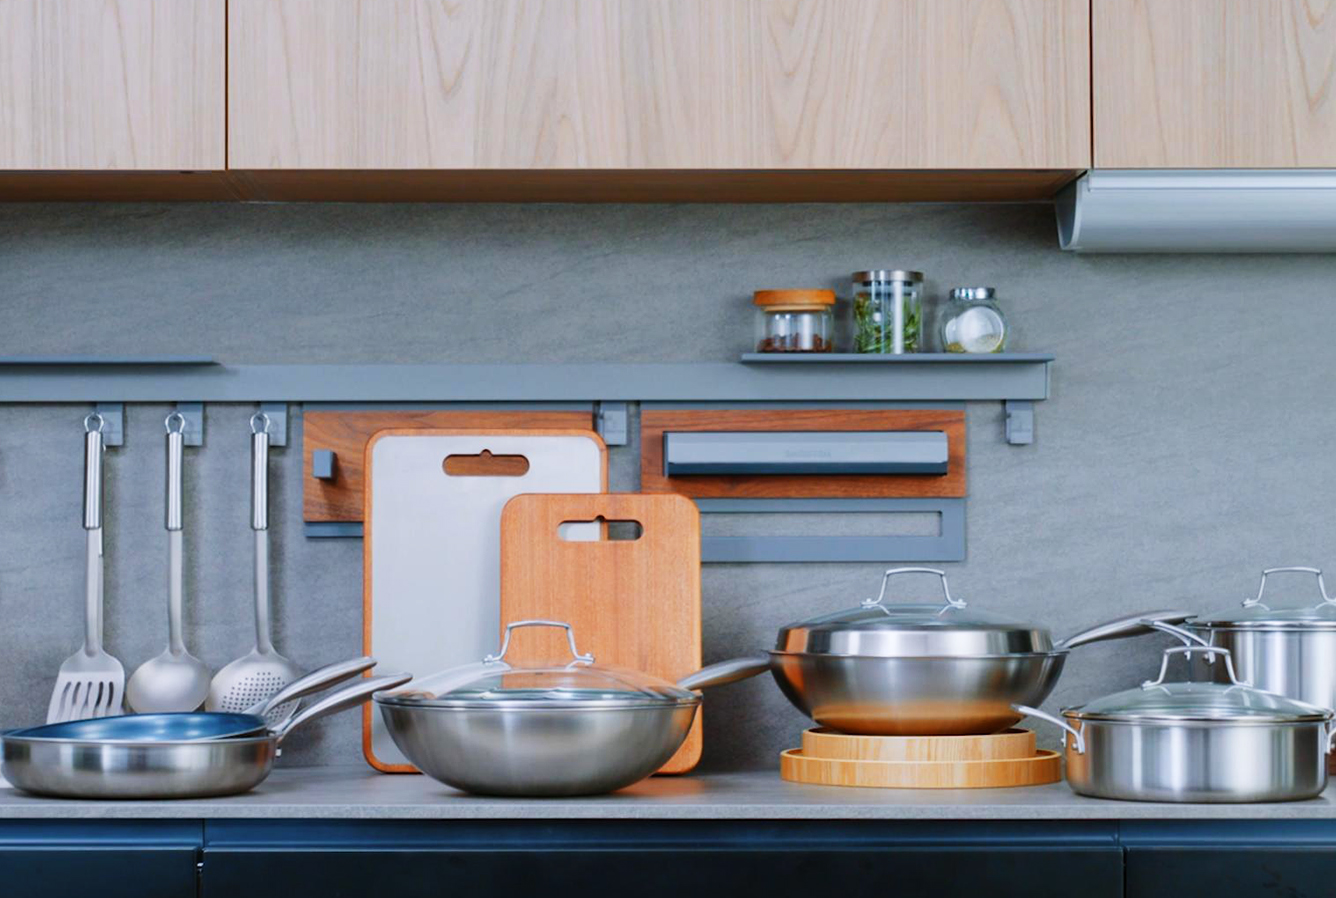 What to consider when choosing cooking pots and pans?